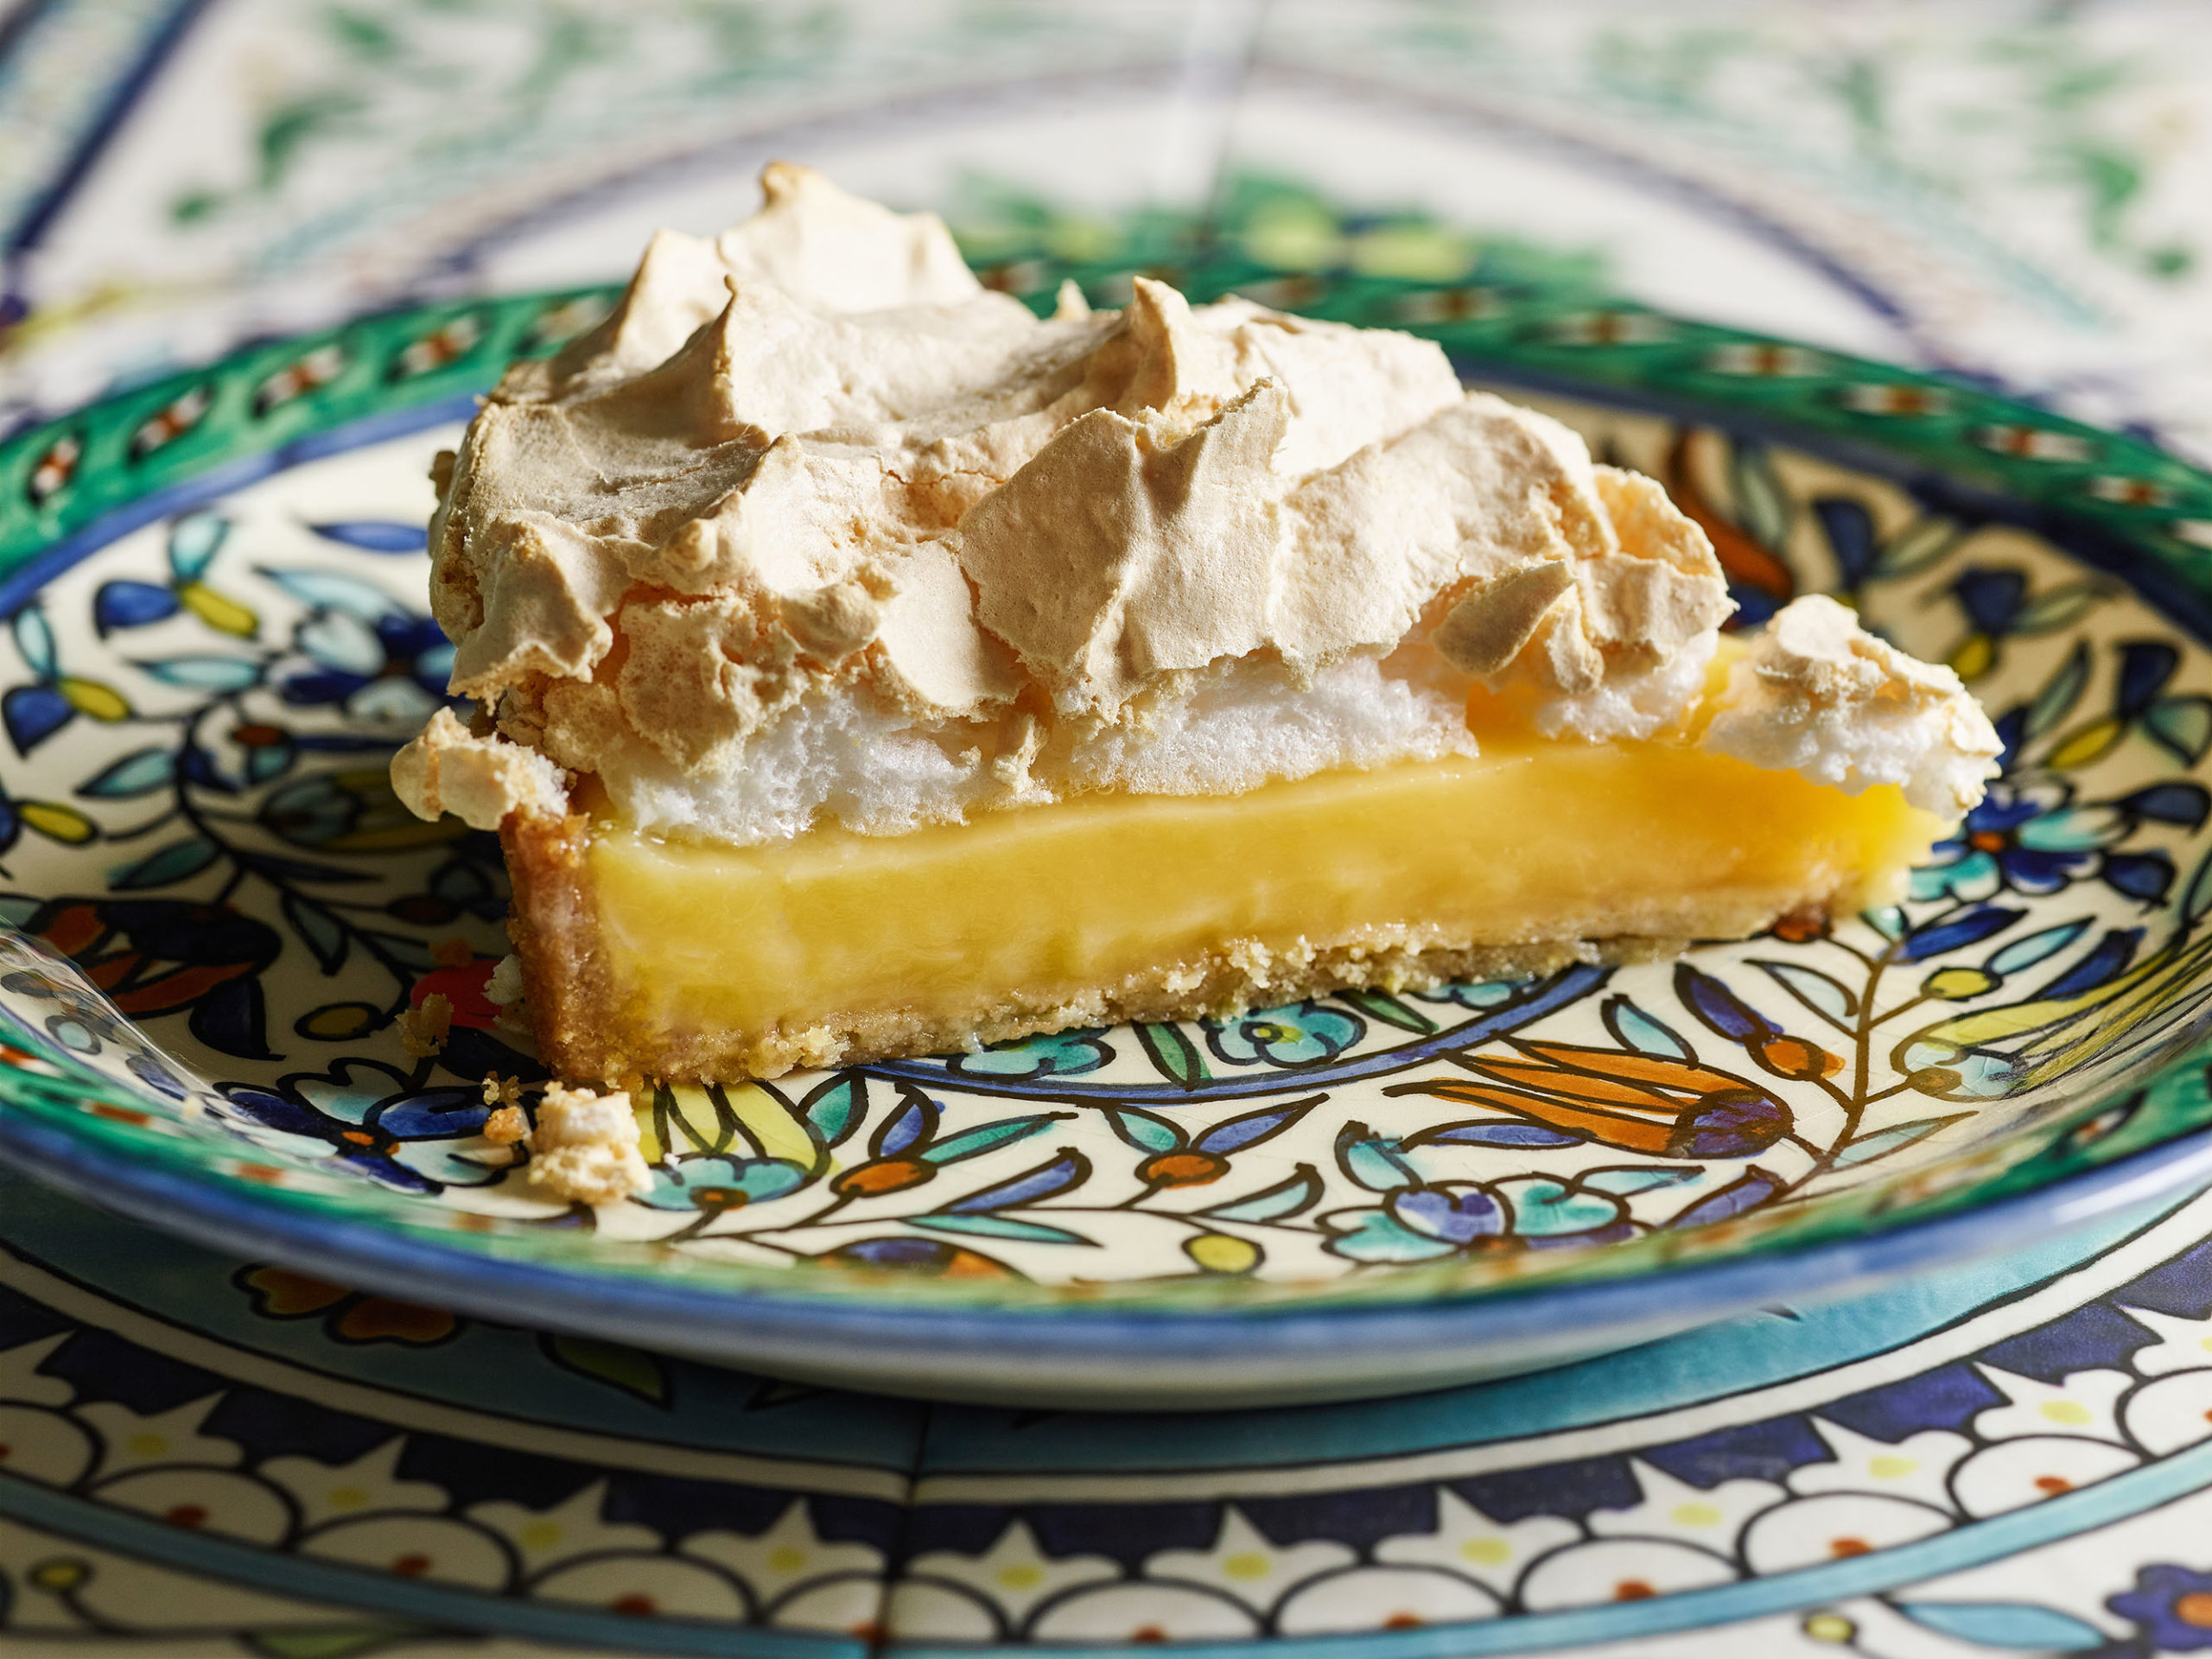 Slice of lemon meringue pie on a ceramic plate with blue dtail